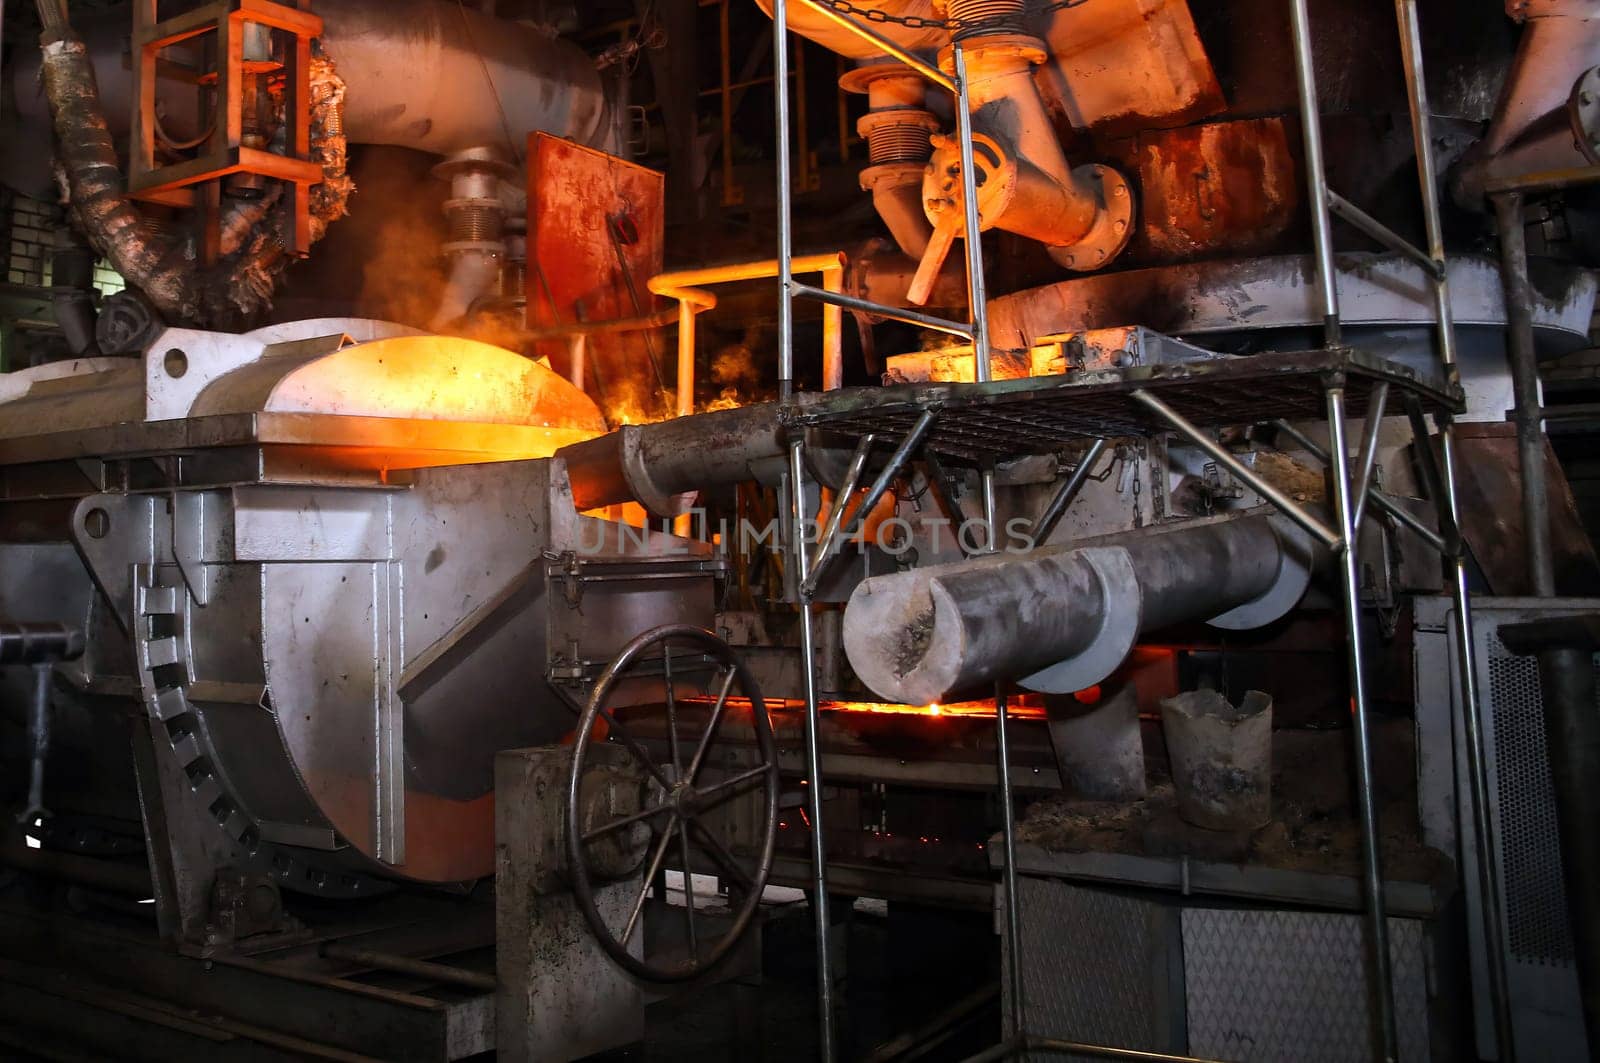 Steel mill Molten metal poured into mold, heavy machinery, metallurgy theme. by Hil